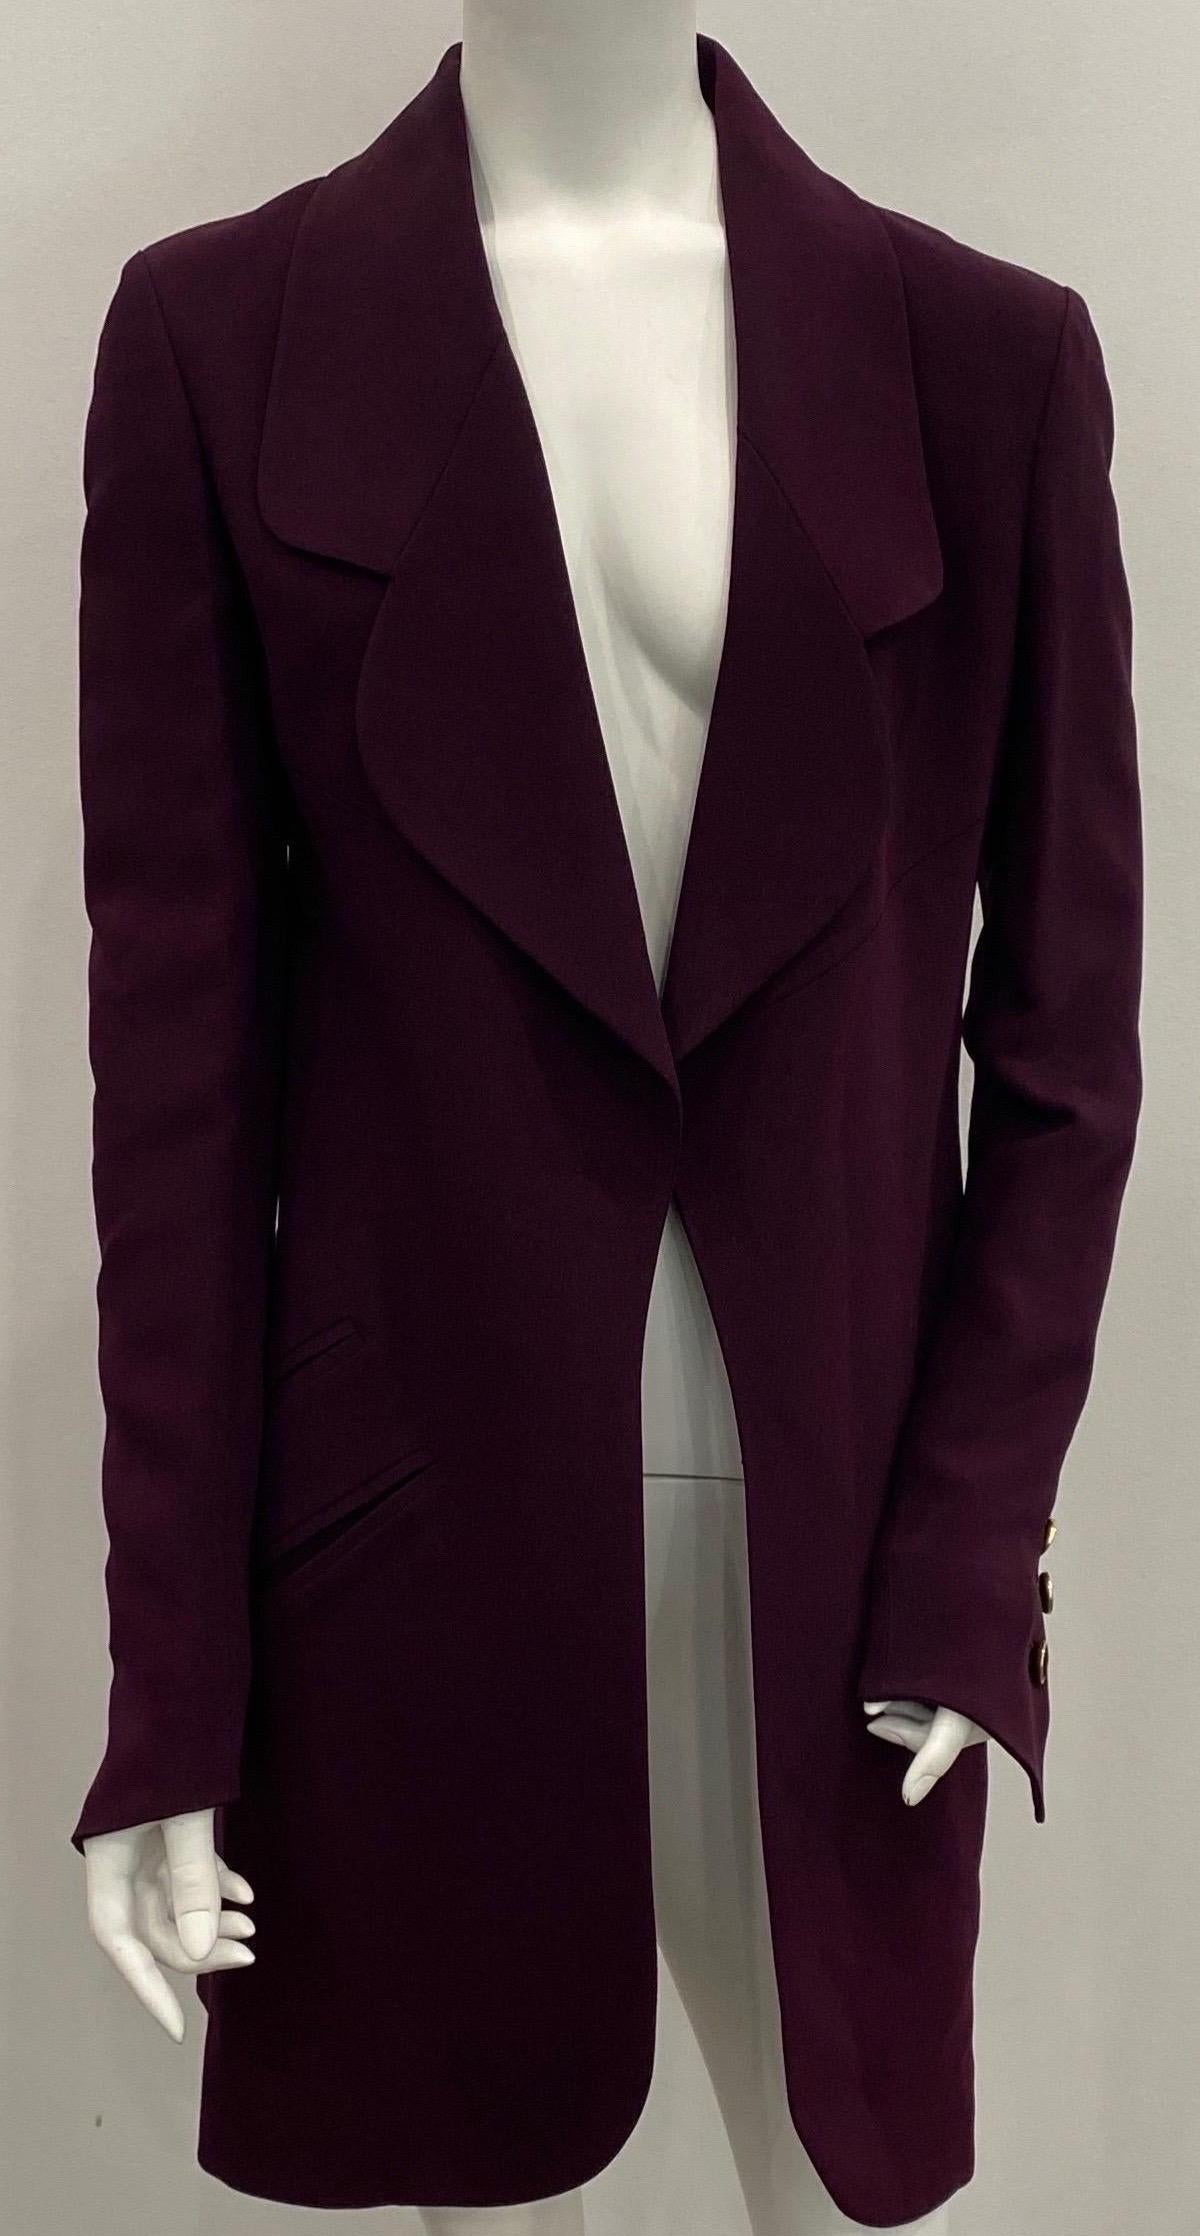 Karl Lagerfeld Eggplant 3/4 Coat - Size 36 This long jacket/Three quarter coat is a beautiful Eggplant Color. The jacket has large lapels, 2 front slit style functional pockets on each side, a back slit, 3 Fabric/Gold decortative buttons on each